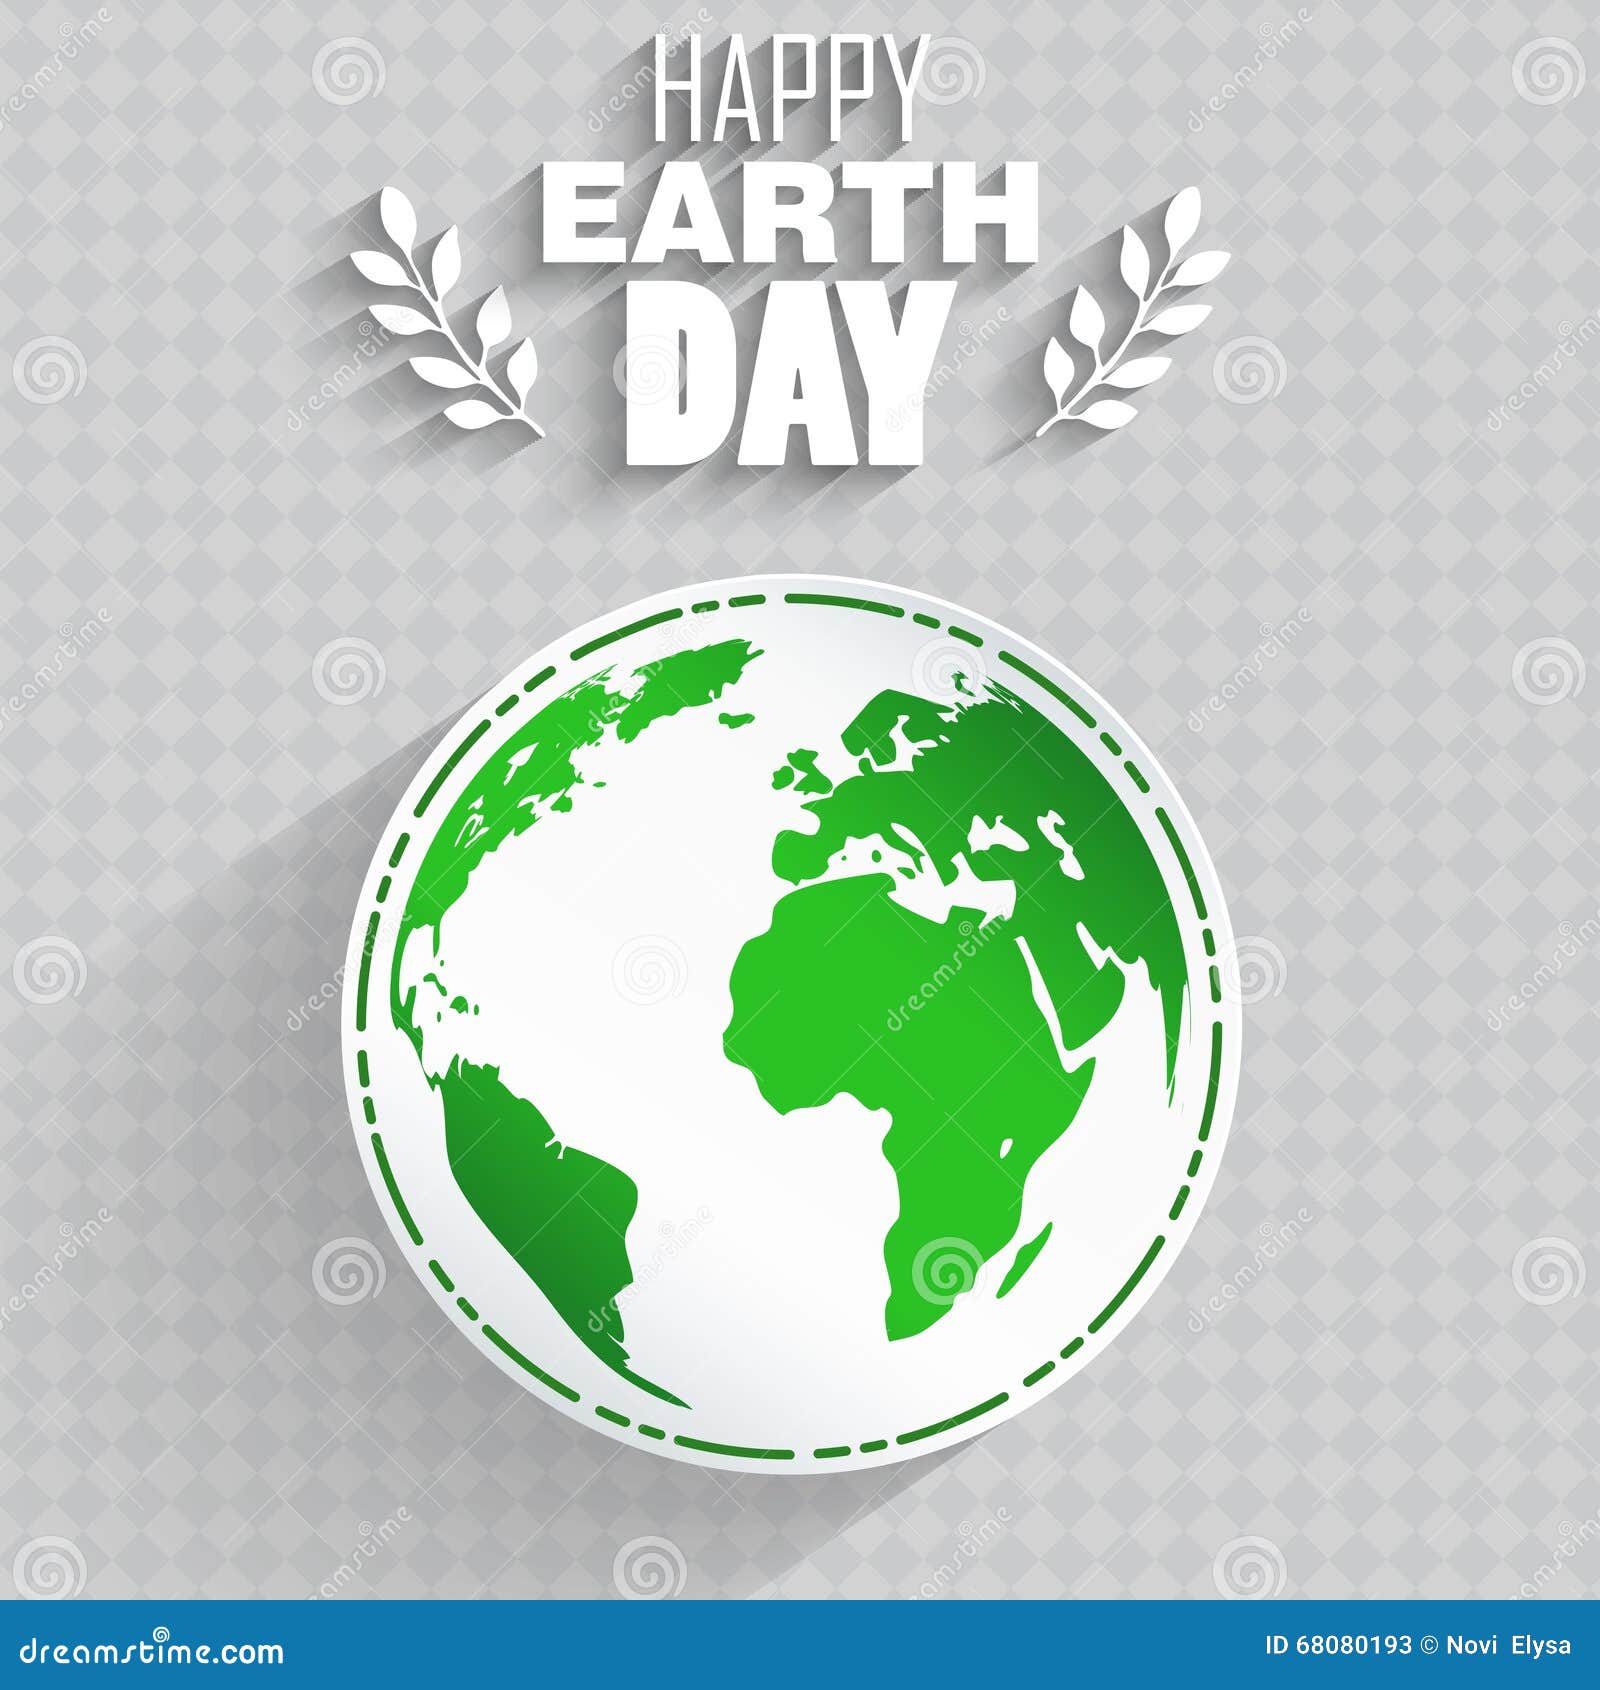 Happy Earth Day background stock vector. Illustration of april - 68080193